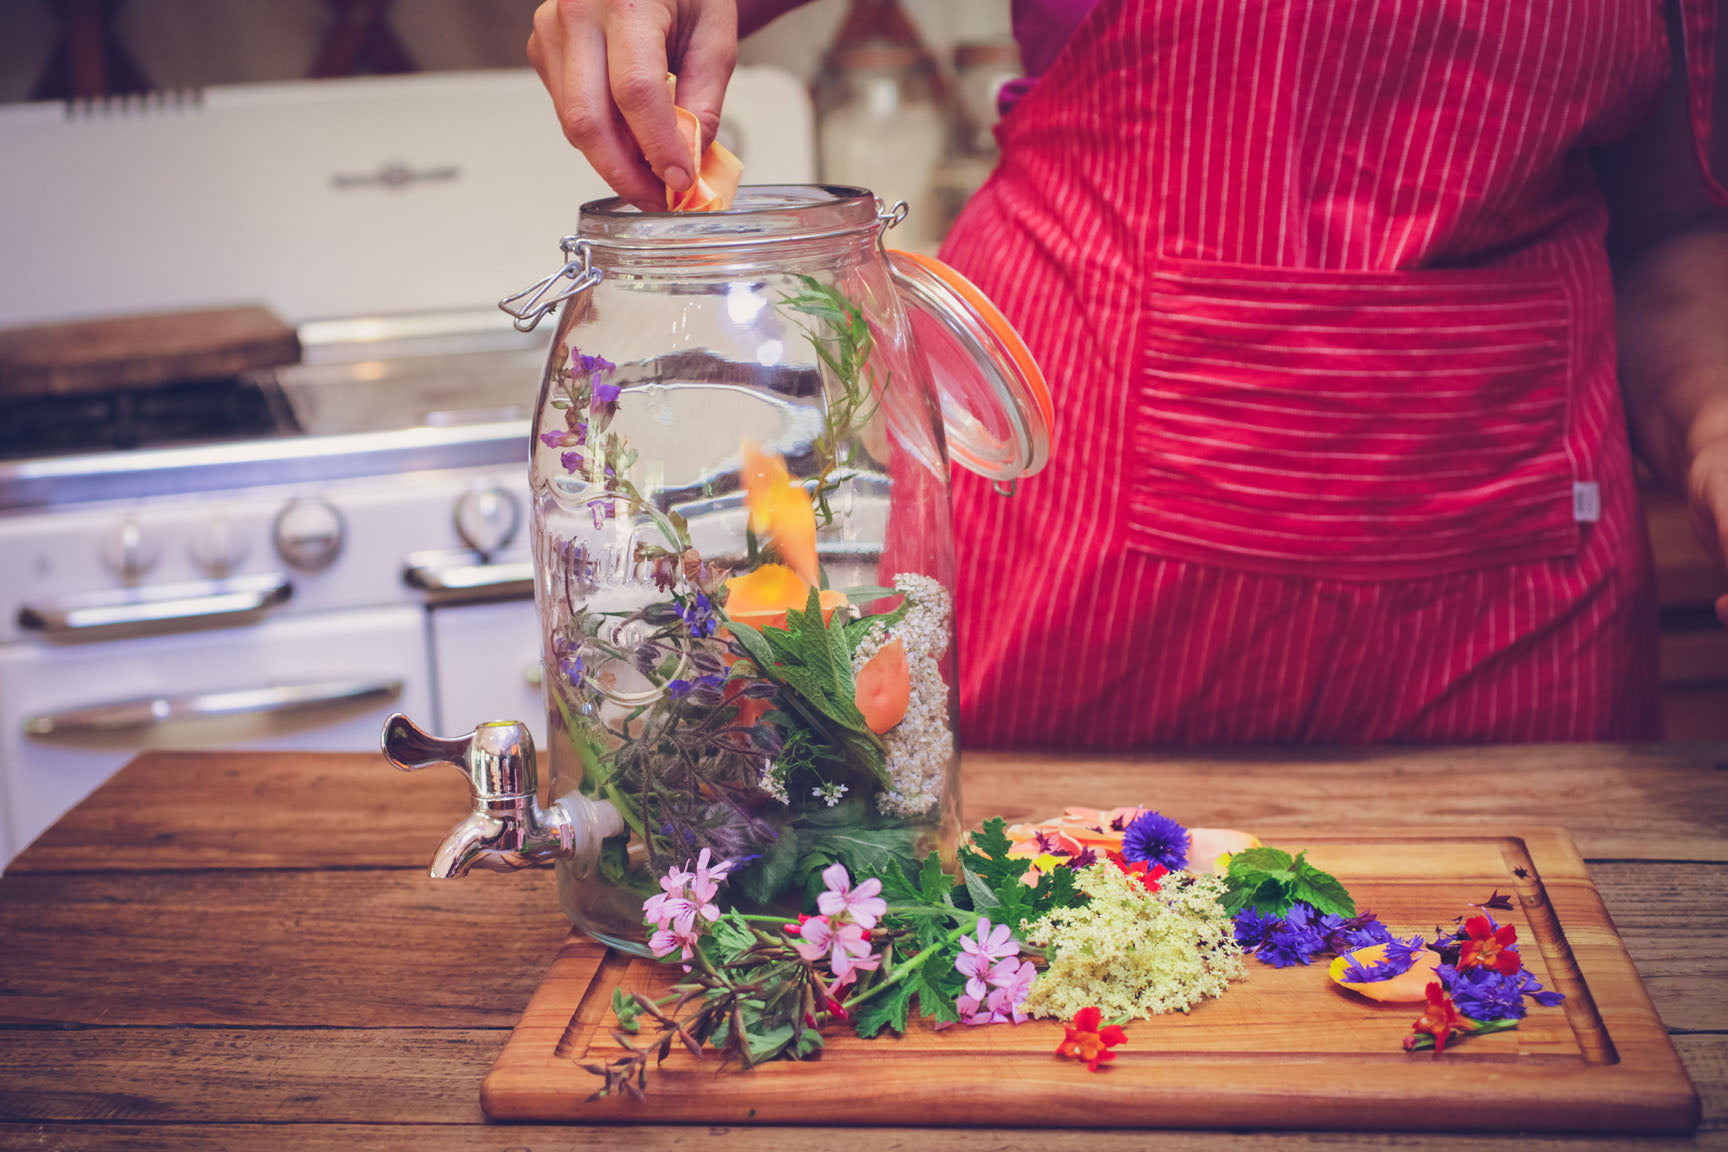 place herbs in jar